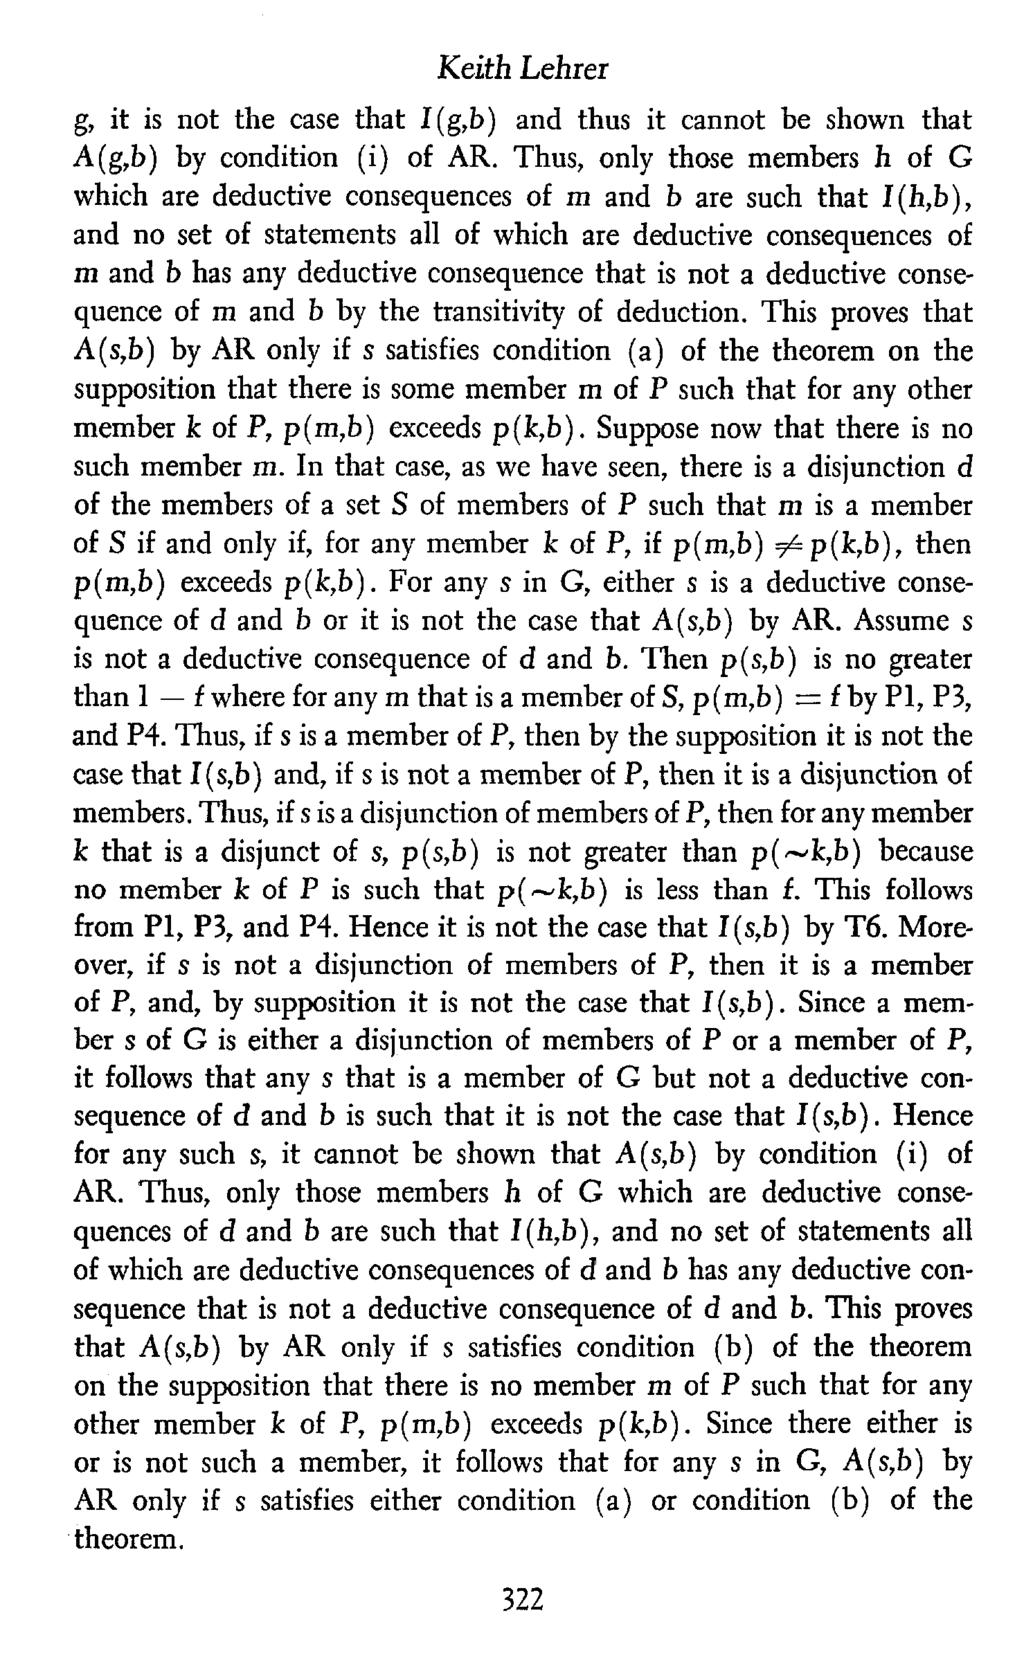 Keith Lehrer g, it is not the case that I(g,b) and thus it cannot be shown that A(g,b) by condition (i) of AR.